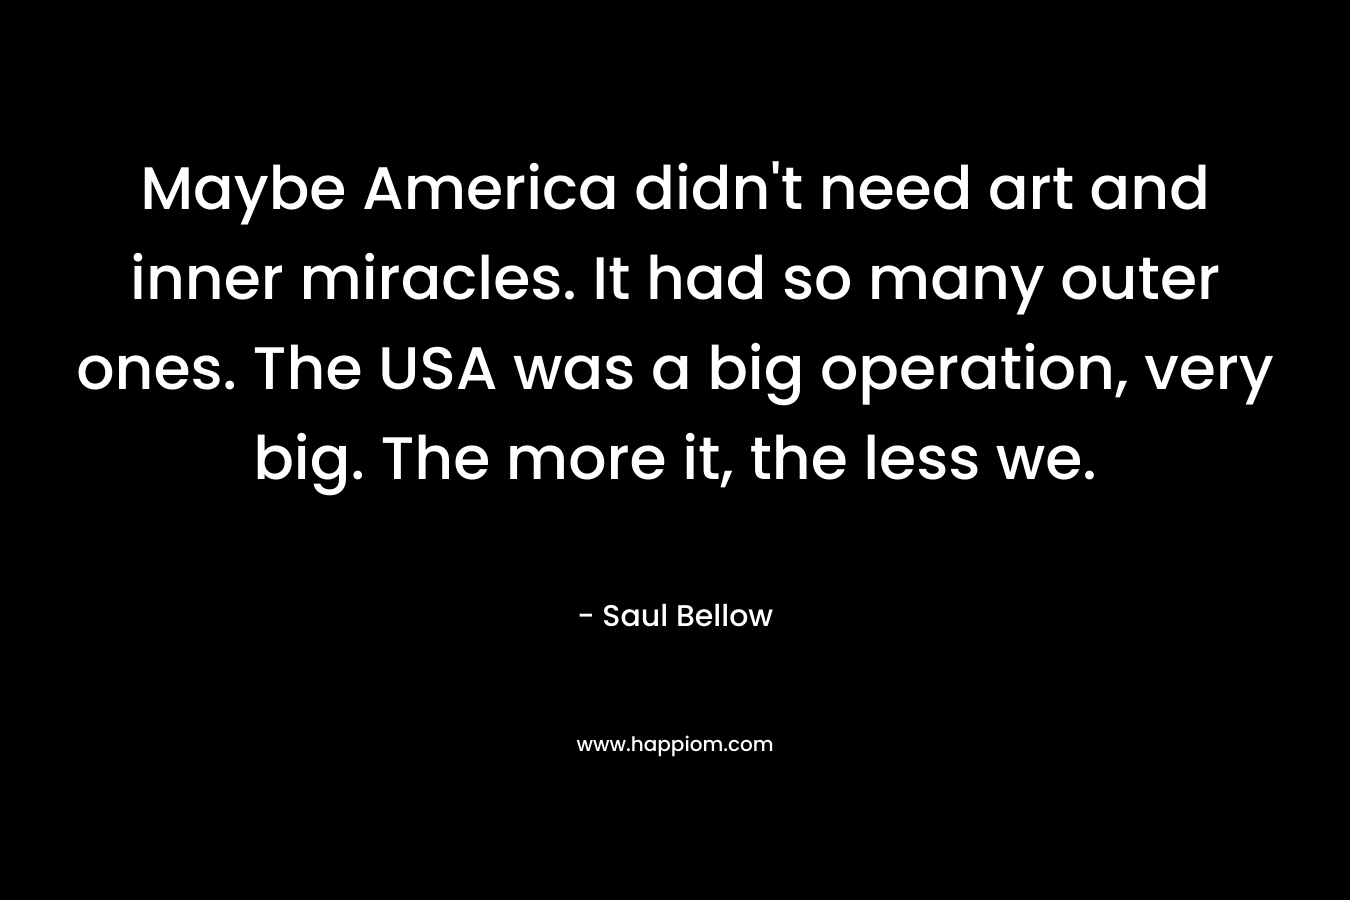 Maybe America didn't need art and inner miracles. It had so many outer ones. The USA was a big operation, very big. The more it, the less we.